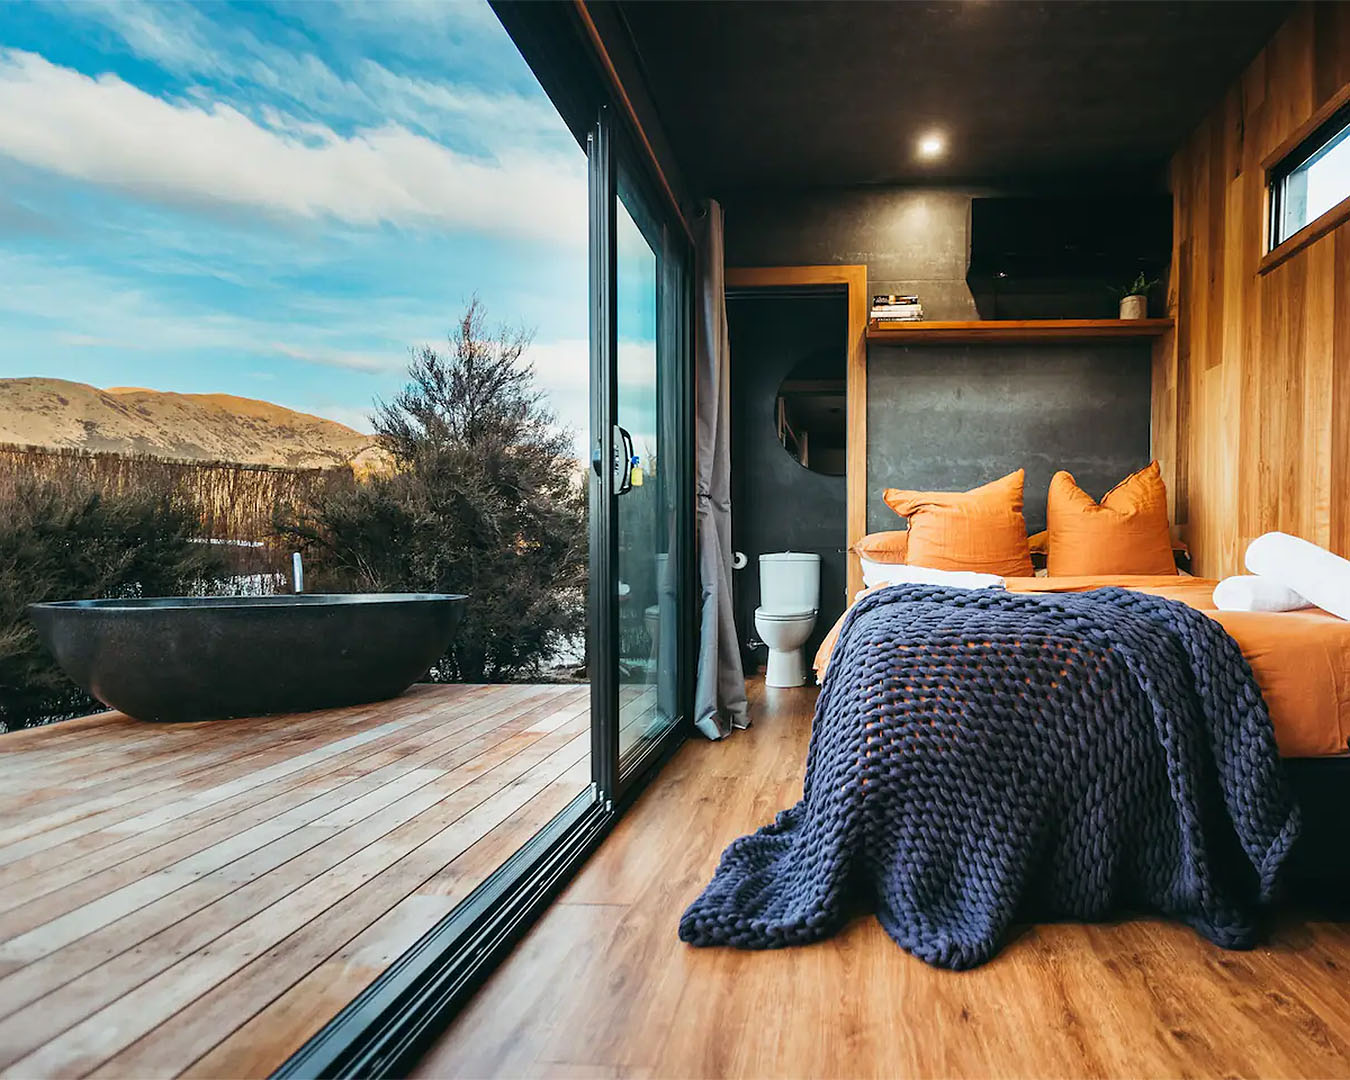 A lovely room looks out onto a bath tub on the deck. One of the best tiny homes in NZ.